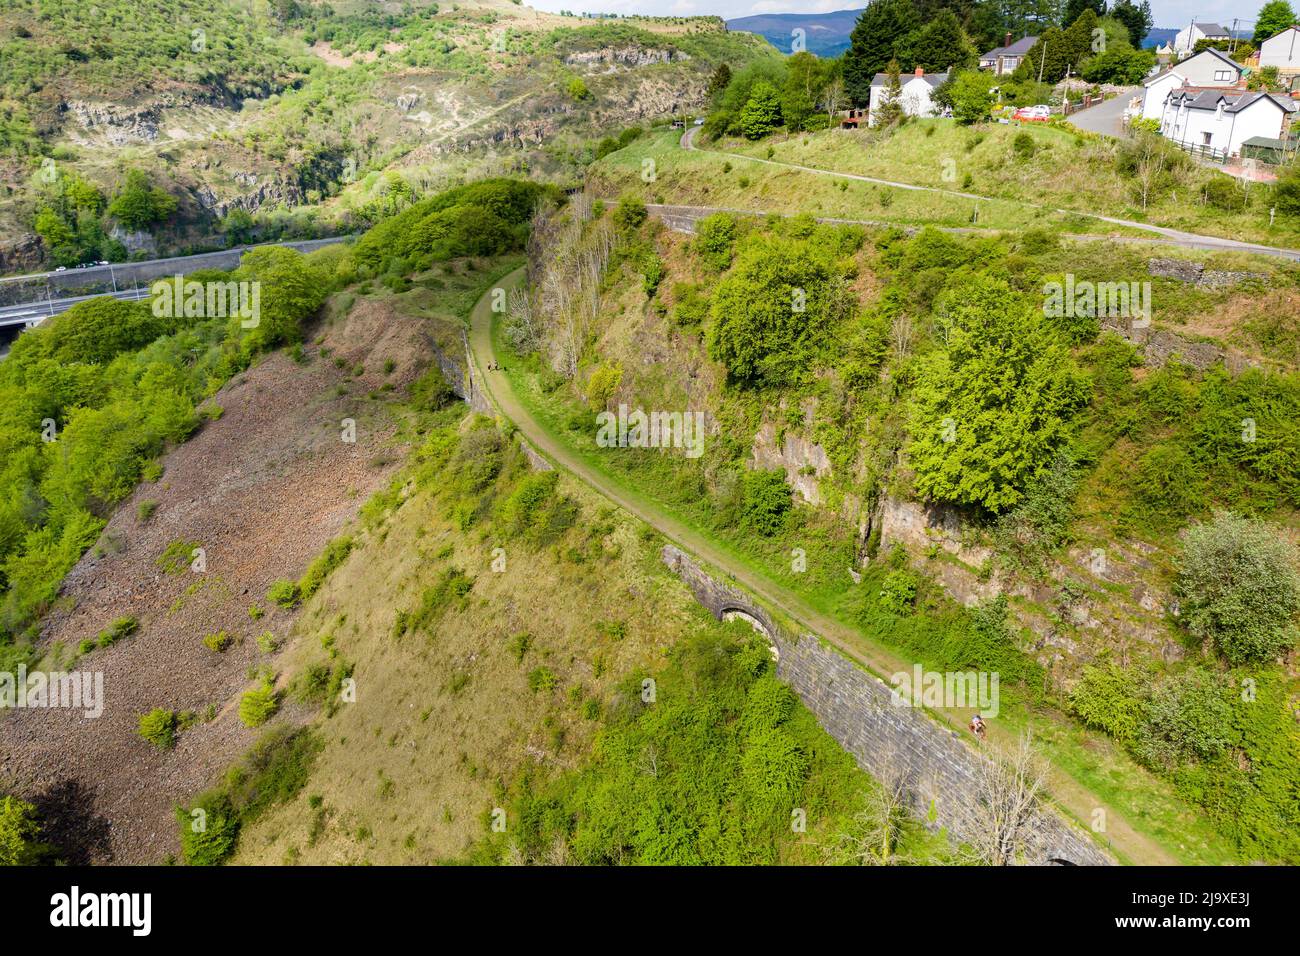 Aerial view of an old tram road converted to a cycle route near the village of Clydach in South Wales, UK Stock Photo